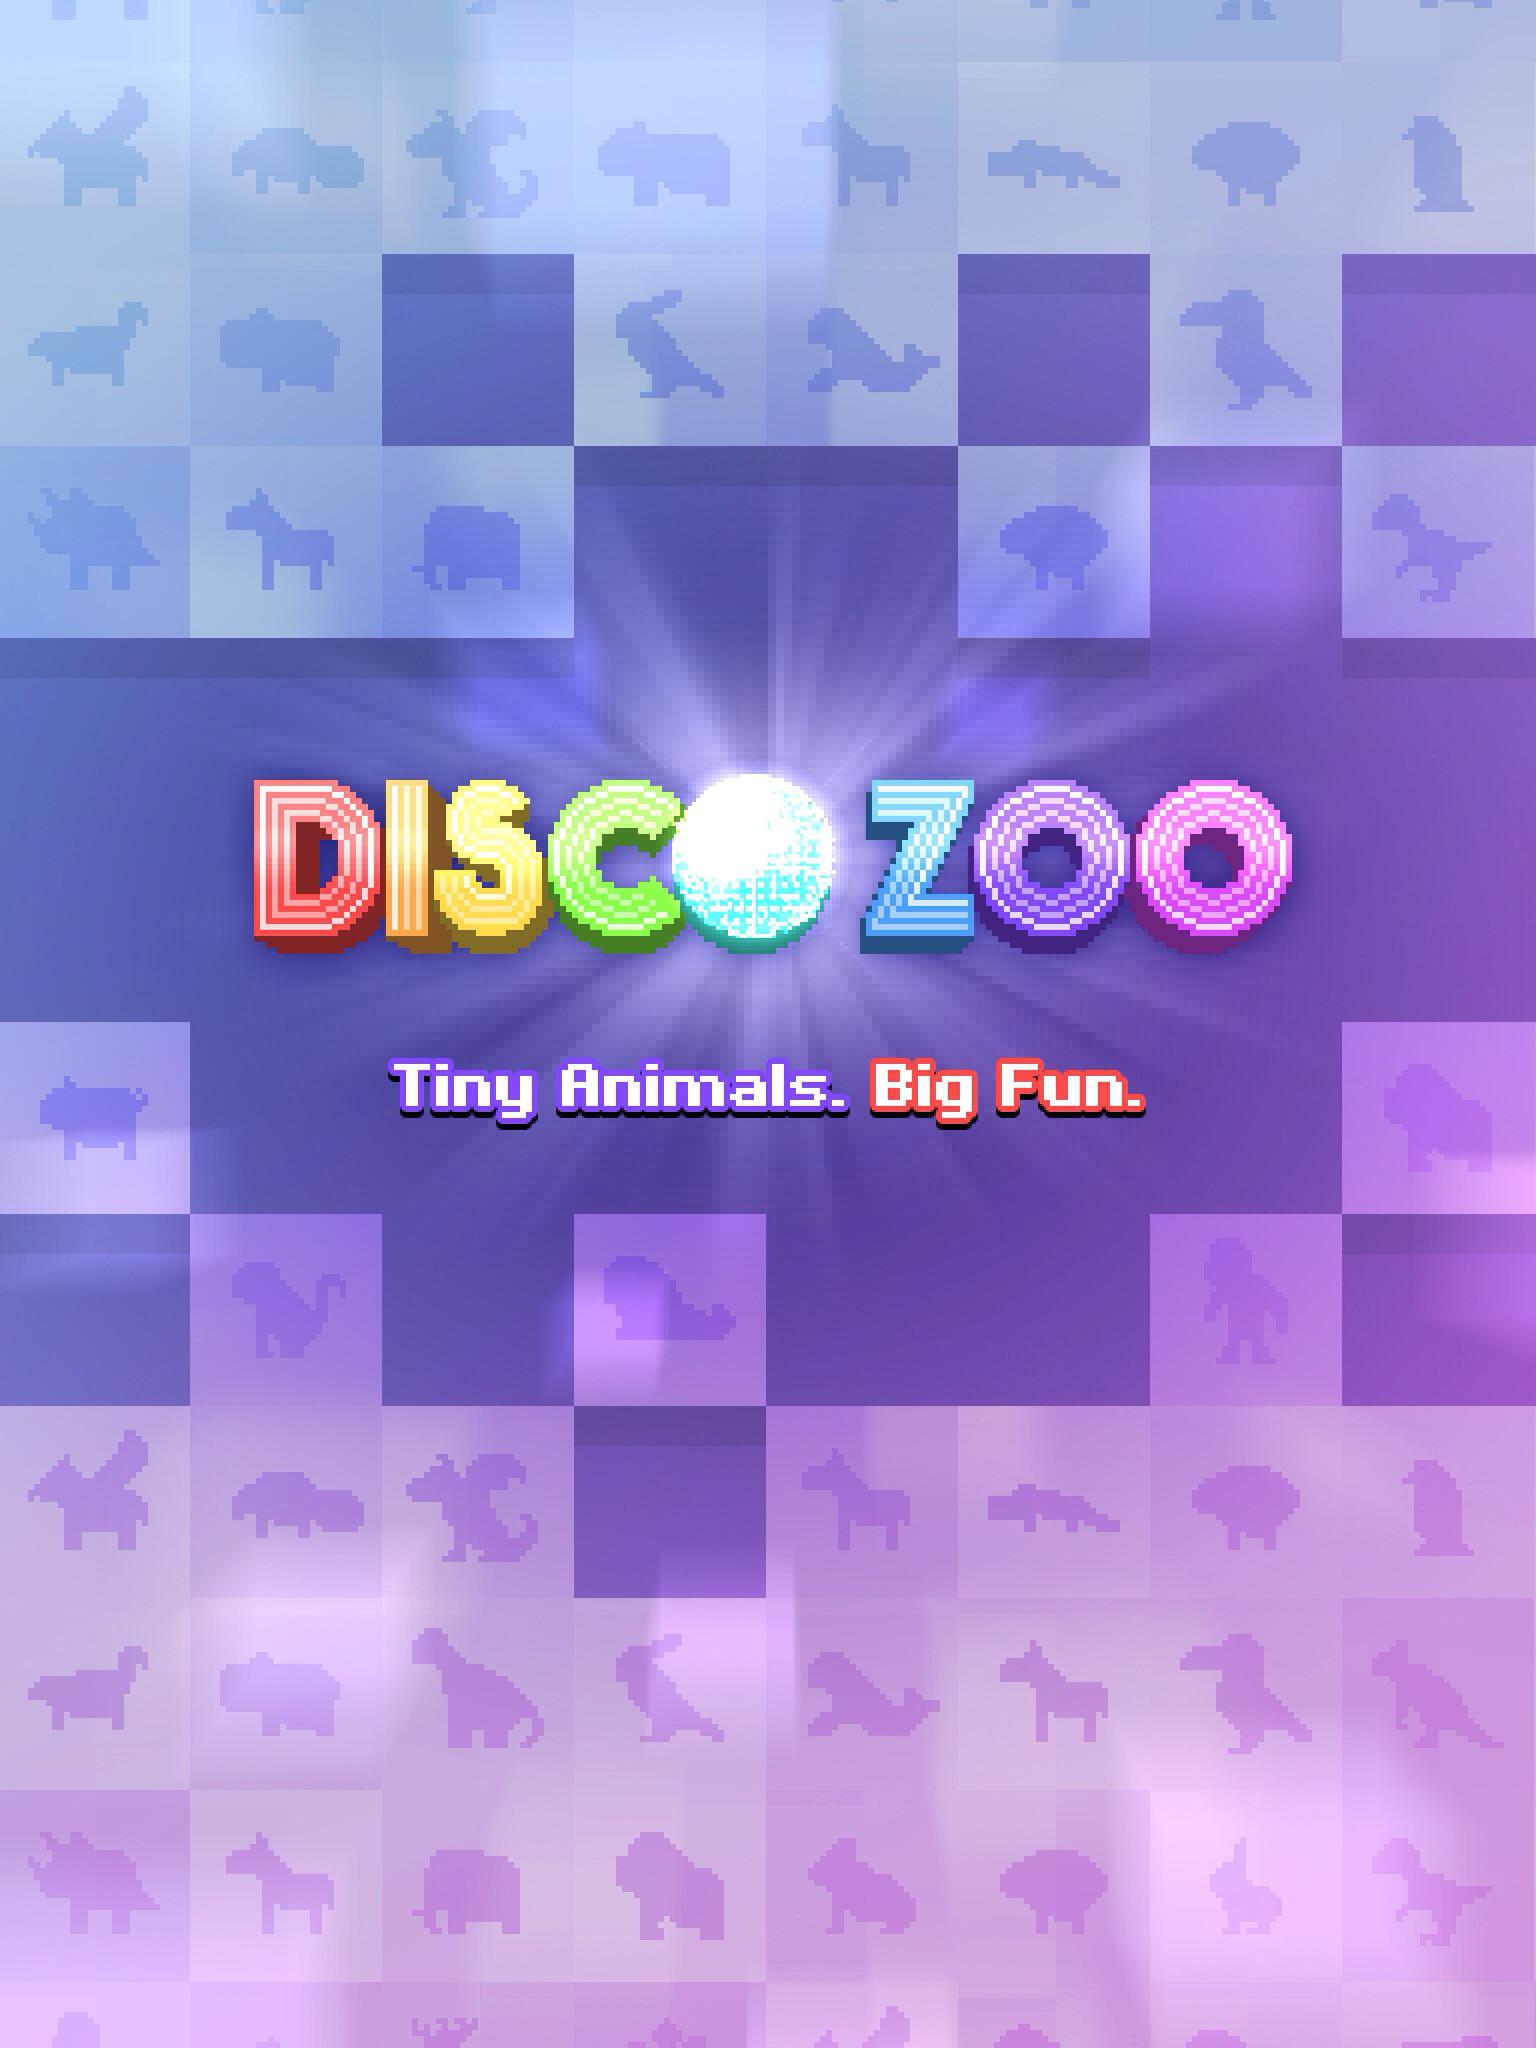 How to patterns and tips on disco zoo - B+C Guides